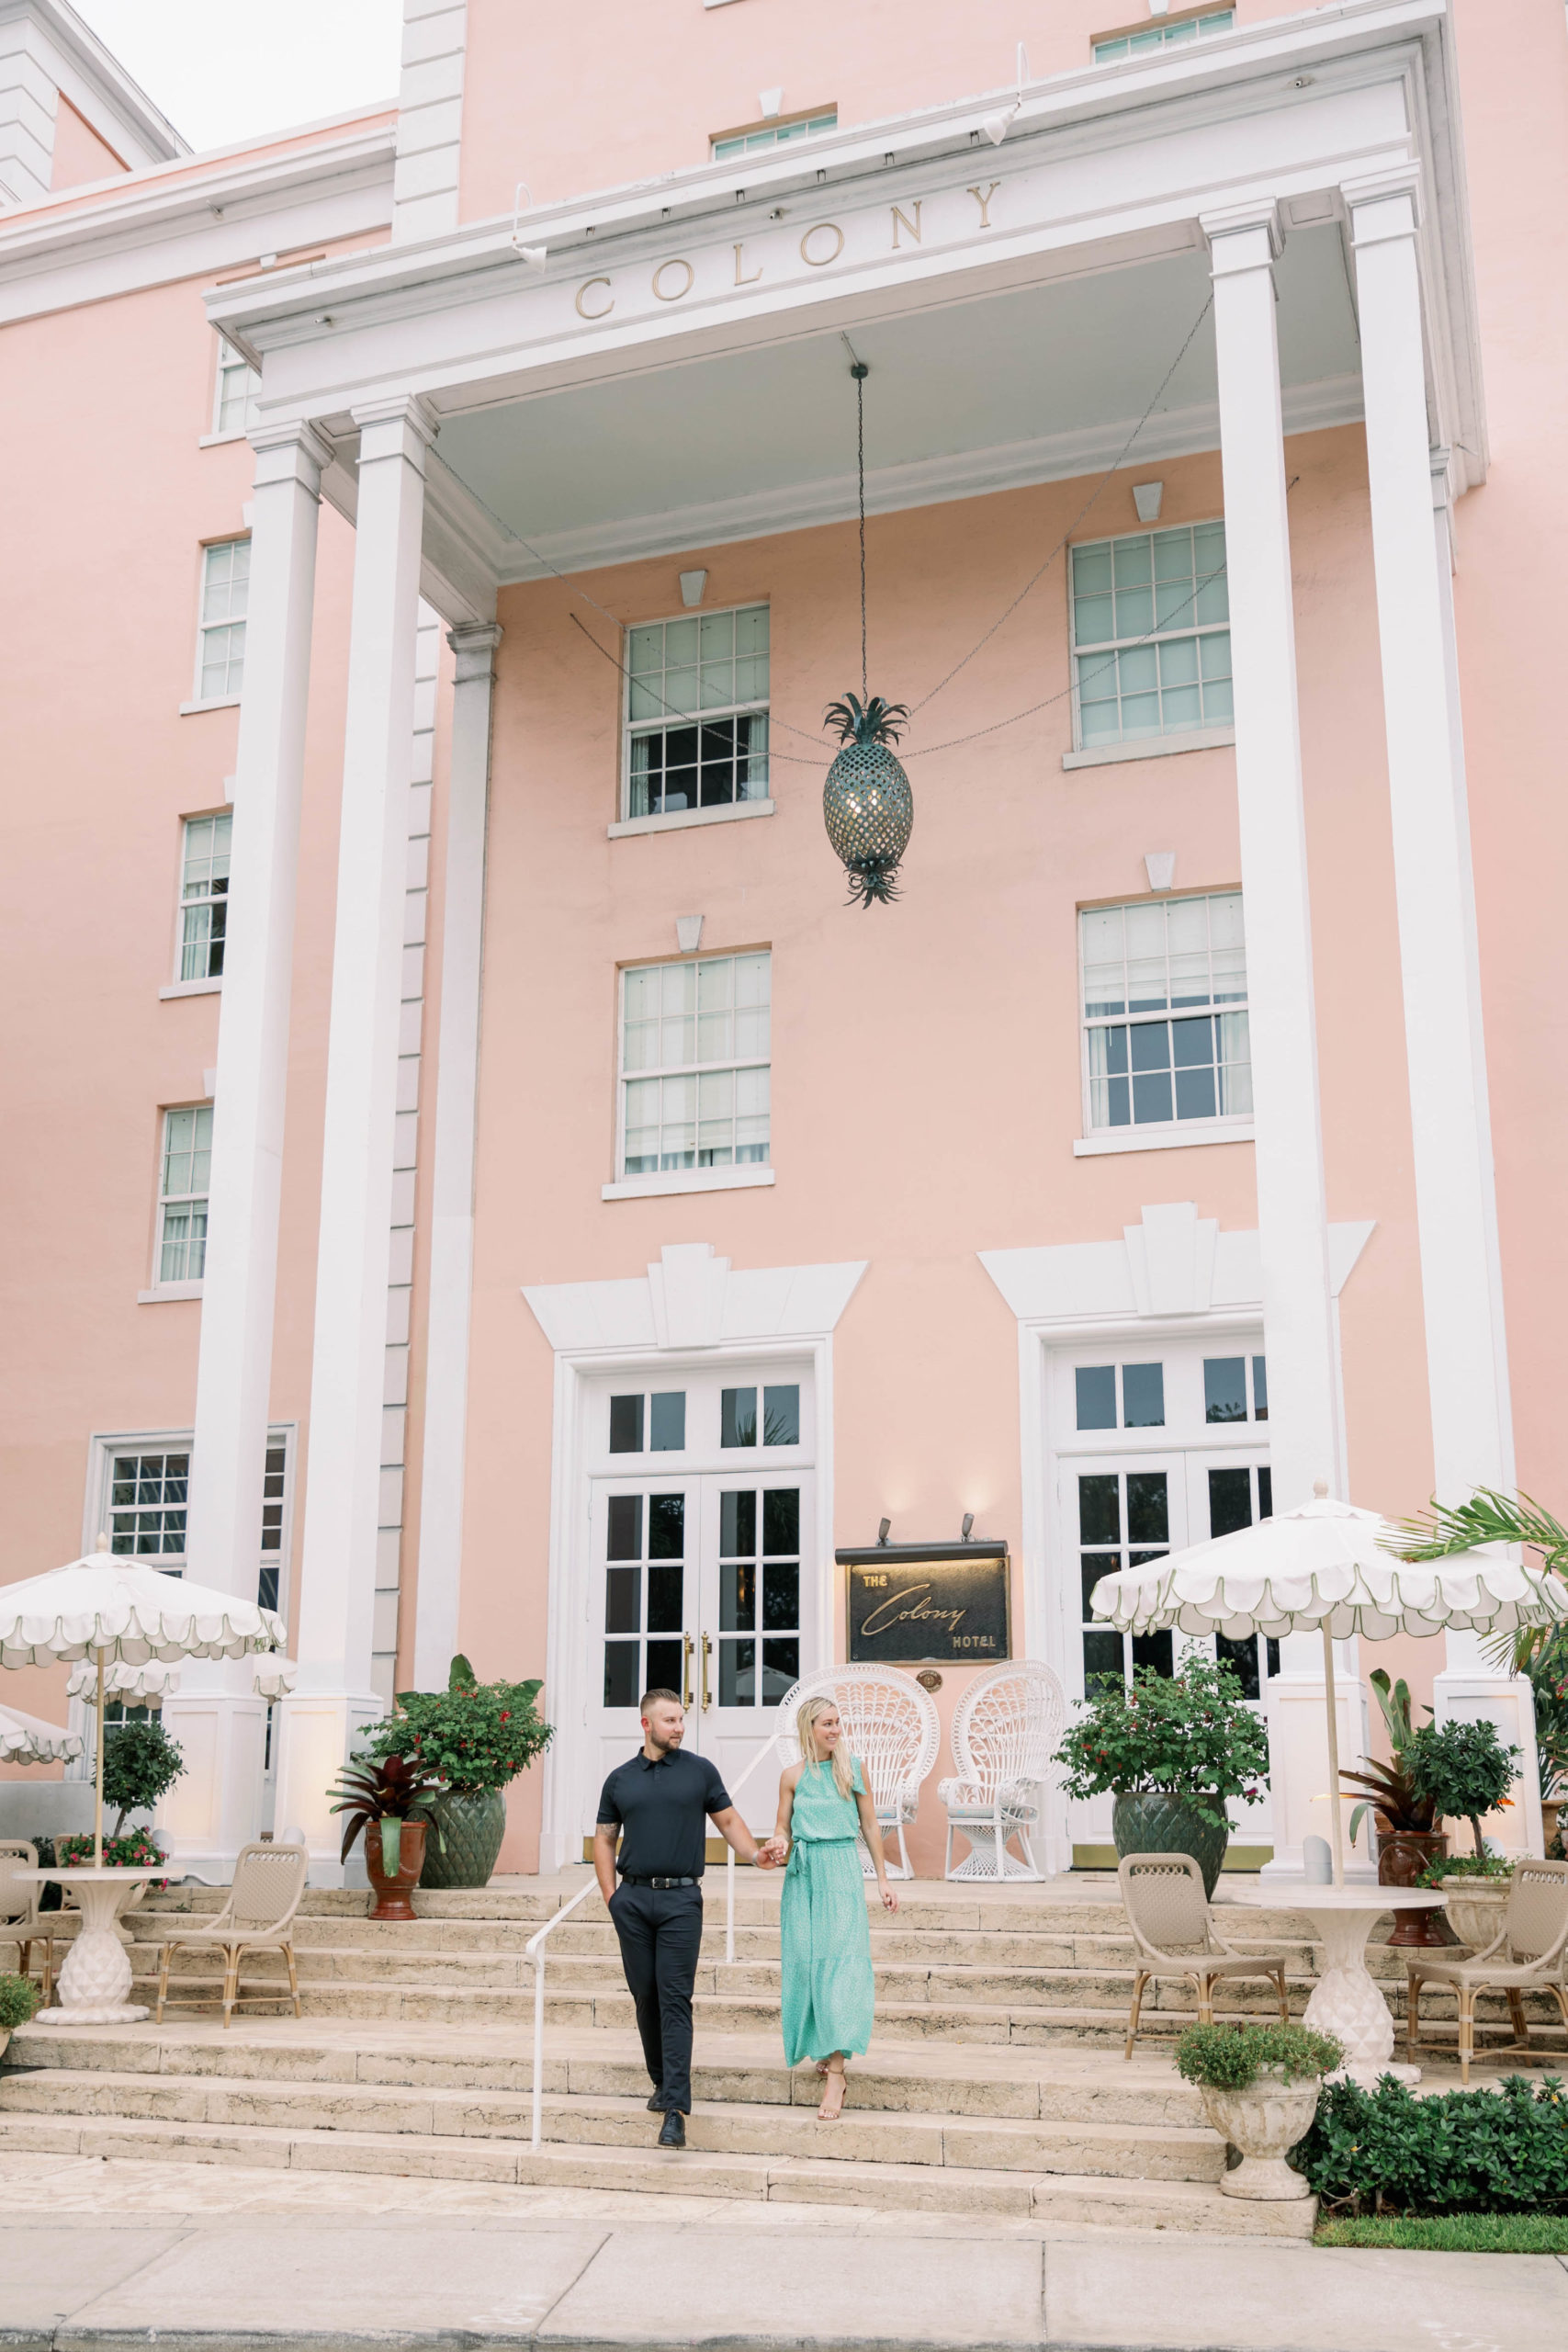 Colony hotel engagement photos